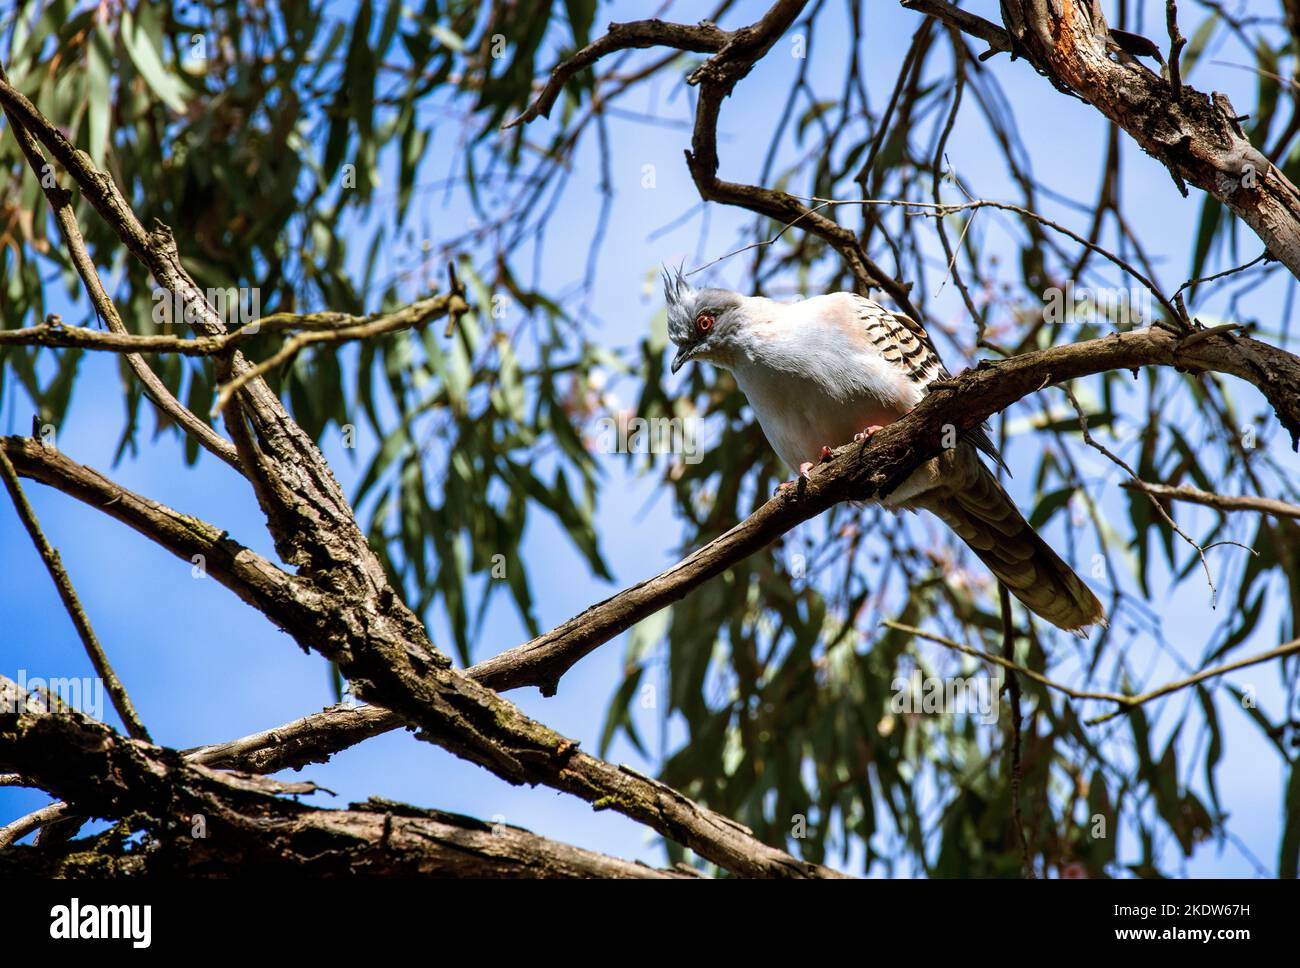 An Australian Crested Pigeons (Ocyphaps lophotes) perched on a tree in Sydney, NSW, Australia (Photo by Tara Chand Malhotra) Stock Photo